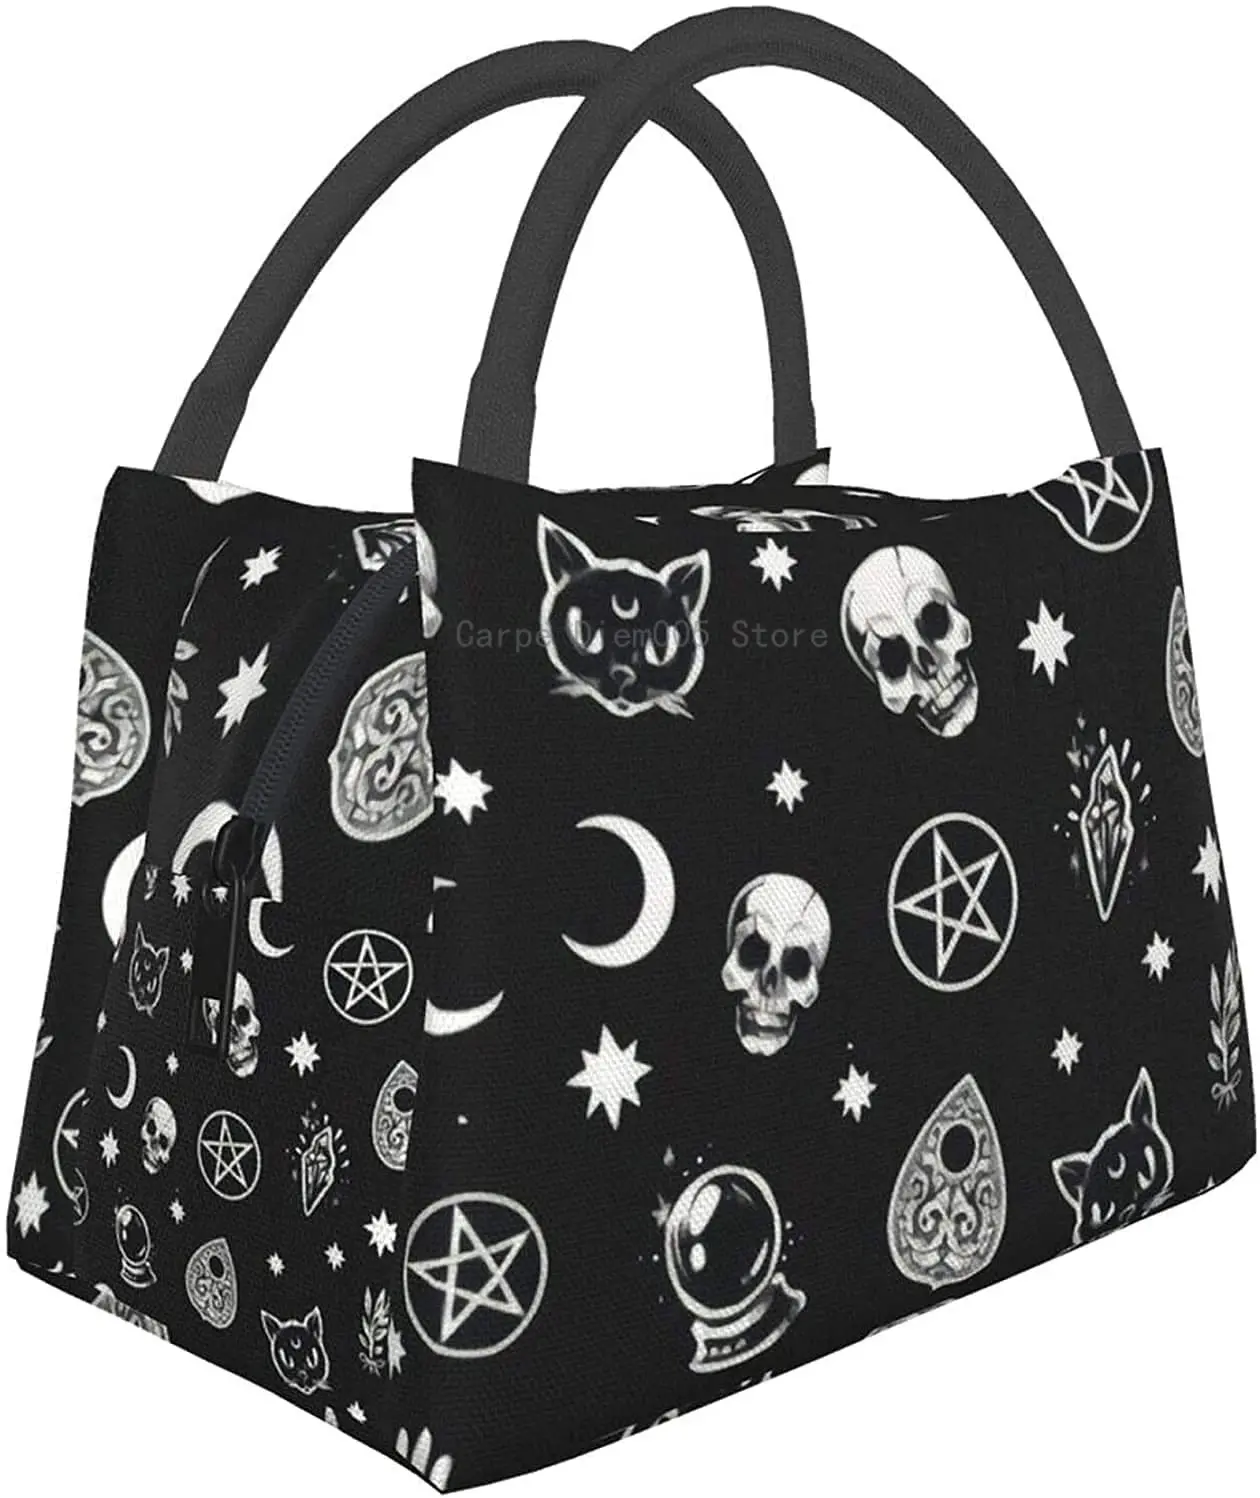 Cat Moon Gothic Pattern Durable Insulated Lunch Bags Portable Thermal Cooler Bag Waterproof Lunch Tote Meal Prep